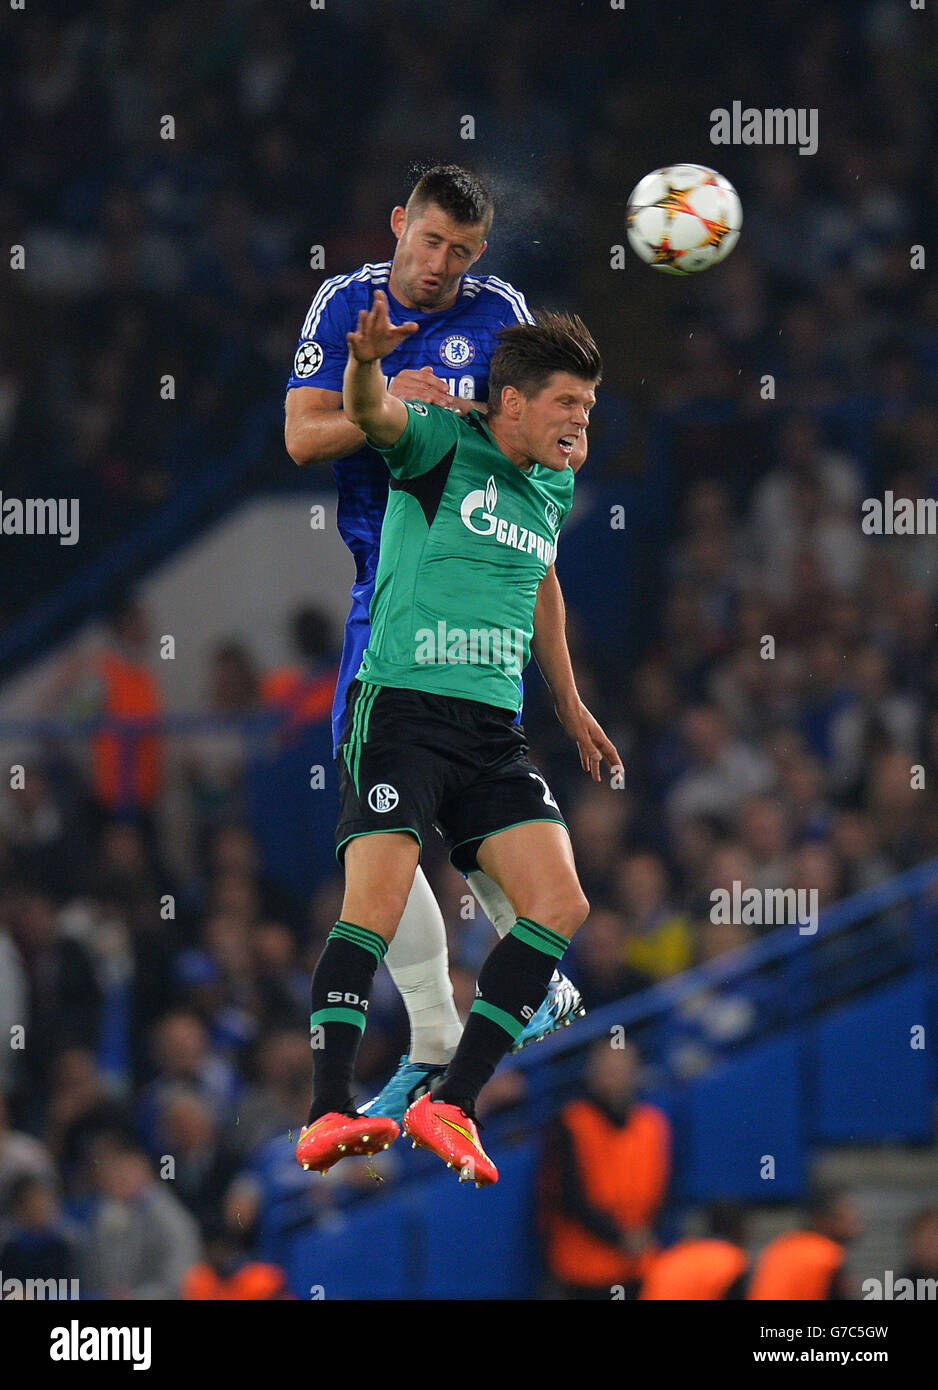 Chelsea's Gary Cahill (top) wins the ball in the air from FC Schalke's Klaas-Jan Huntelaar during the UEFA Champions League, Group G match at Stamford Bridge, Liverpool. Stock Photo